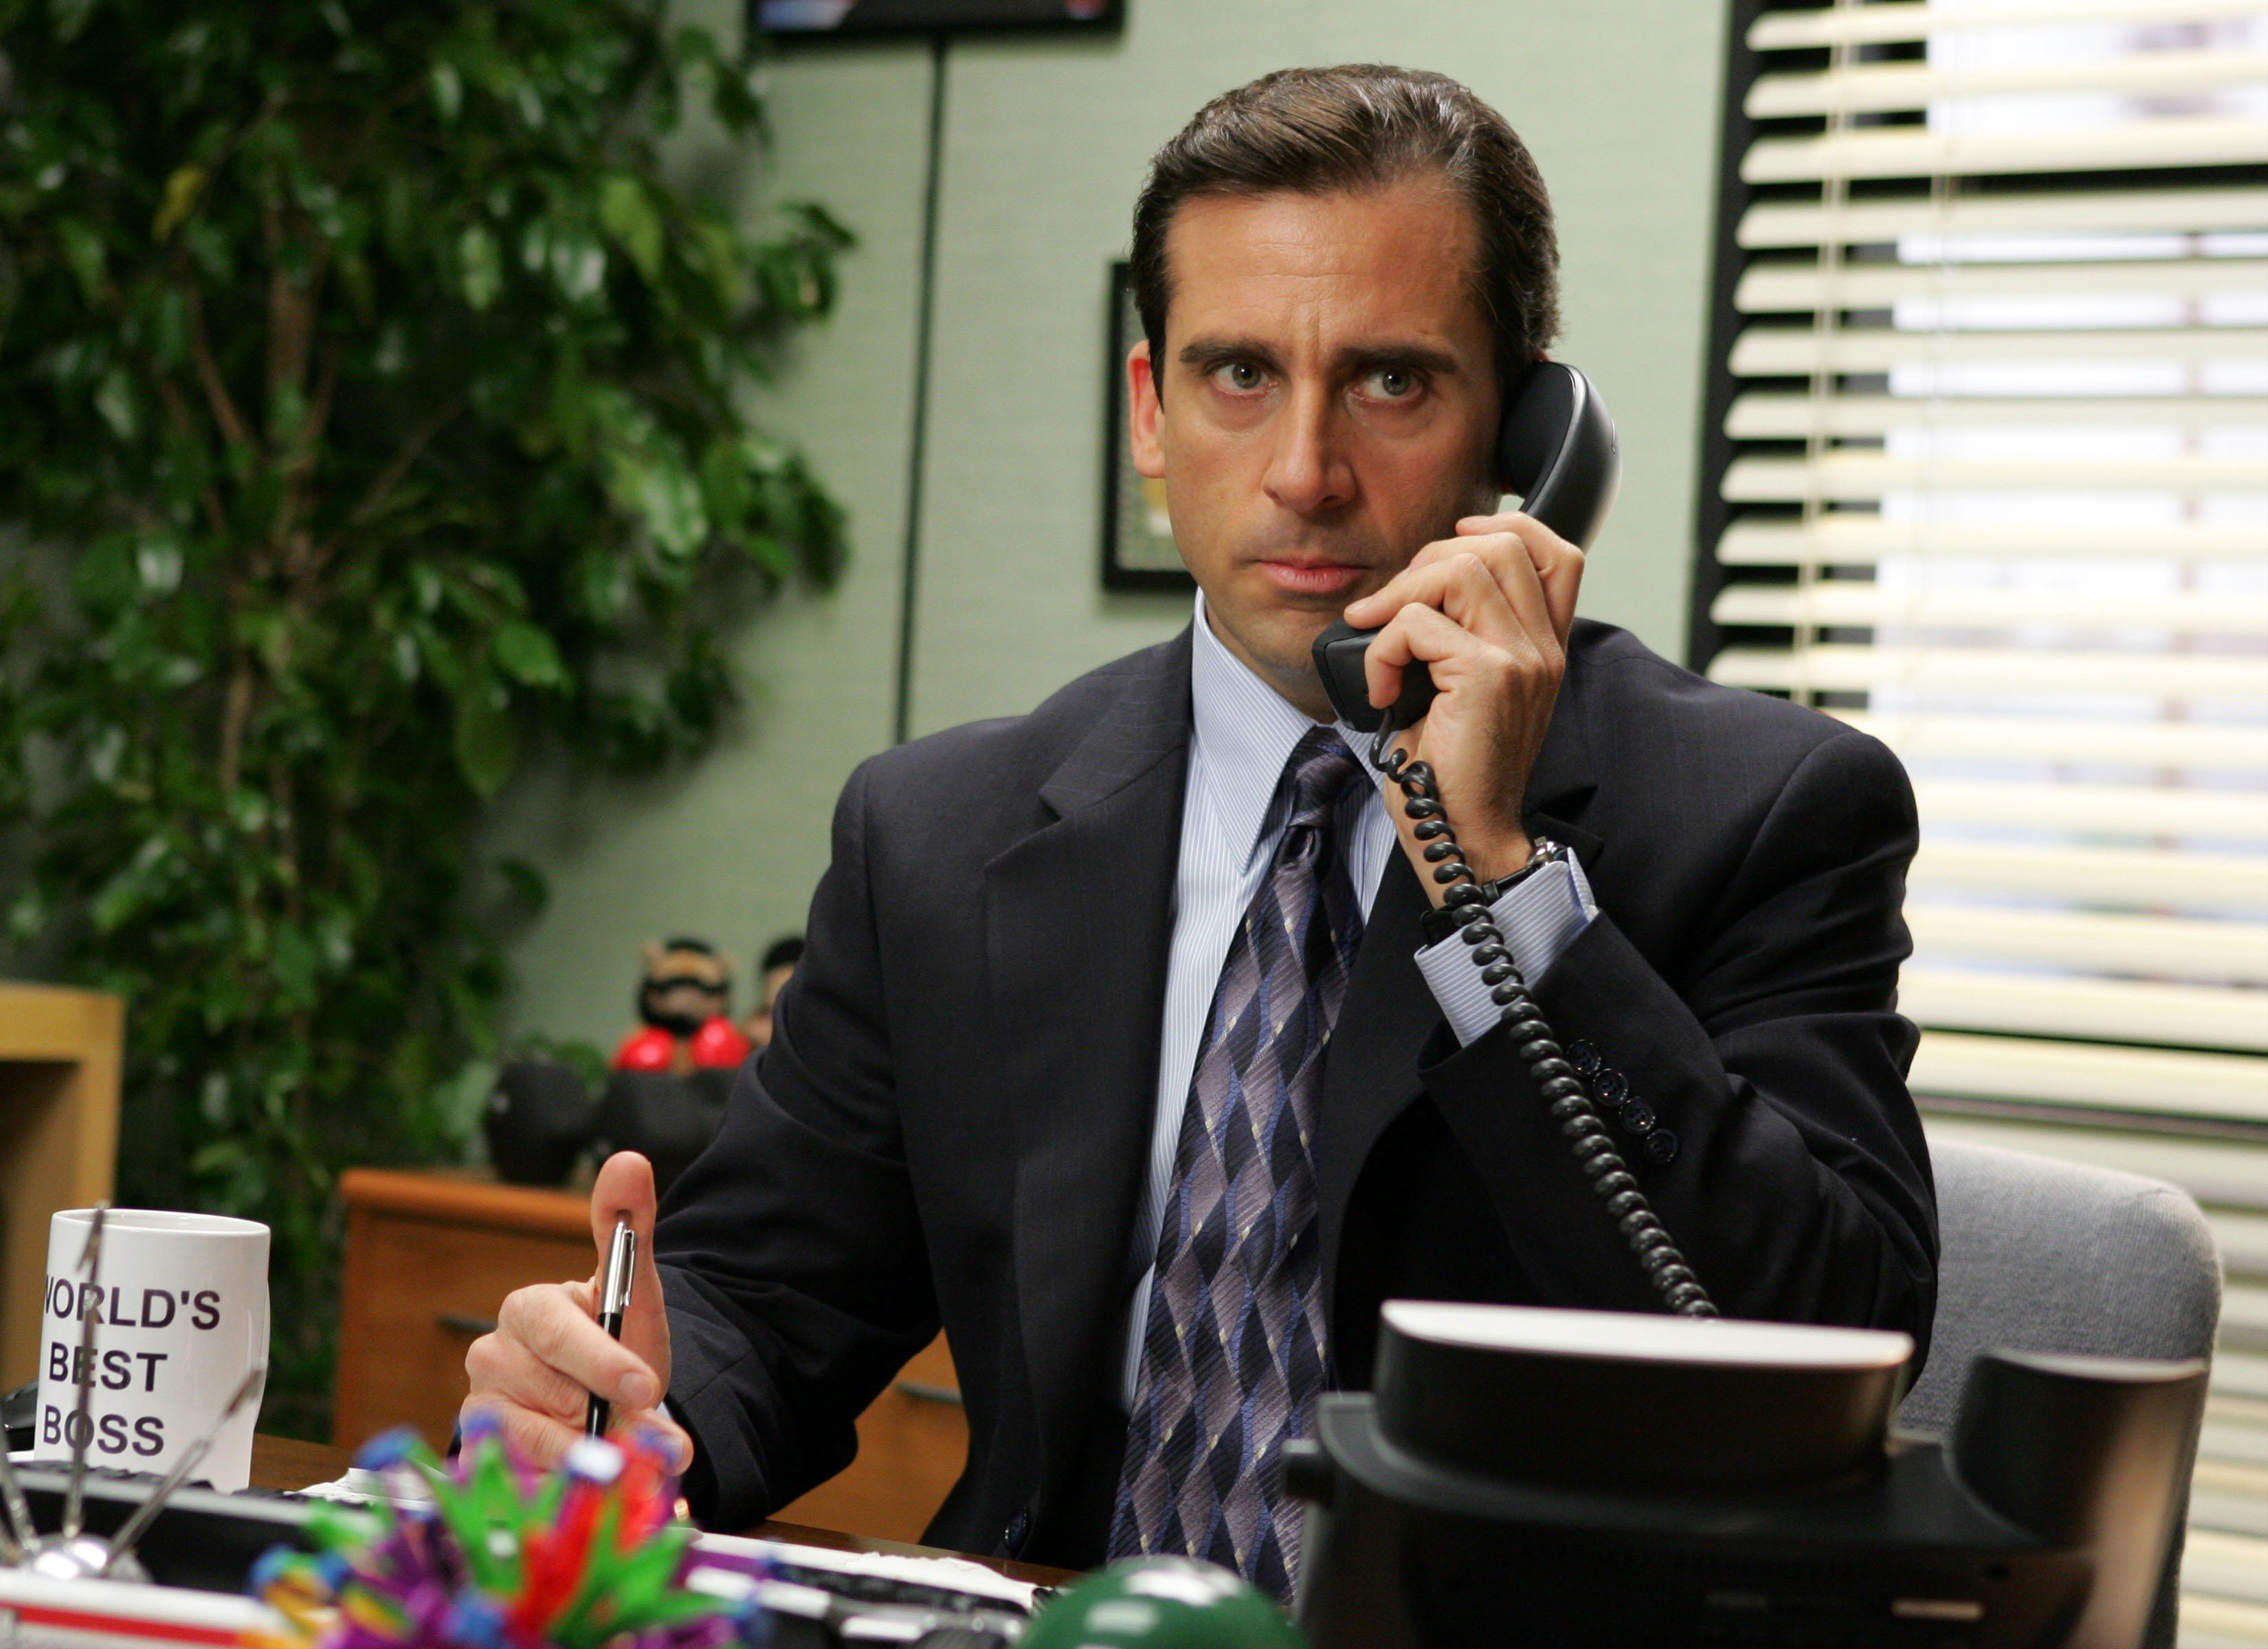 In this undated publicity photo released by NBC, actor Steve Carell appears in this scene from the television series "The Office." Carell was nominated for lead actor in a comedy series, Thursday, July 6, 2006, when the nominations for the 58th Annual Primetime Emmy Awards were announced in Los Angeles. (AP Photo/NBC, Justin Lubin)